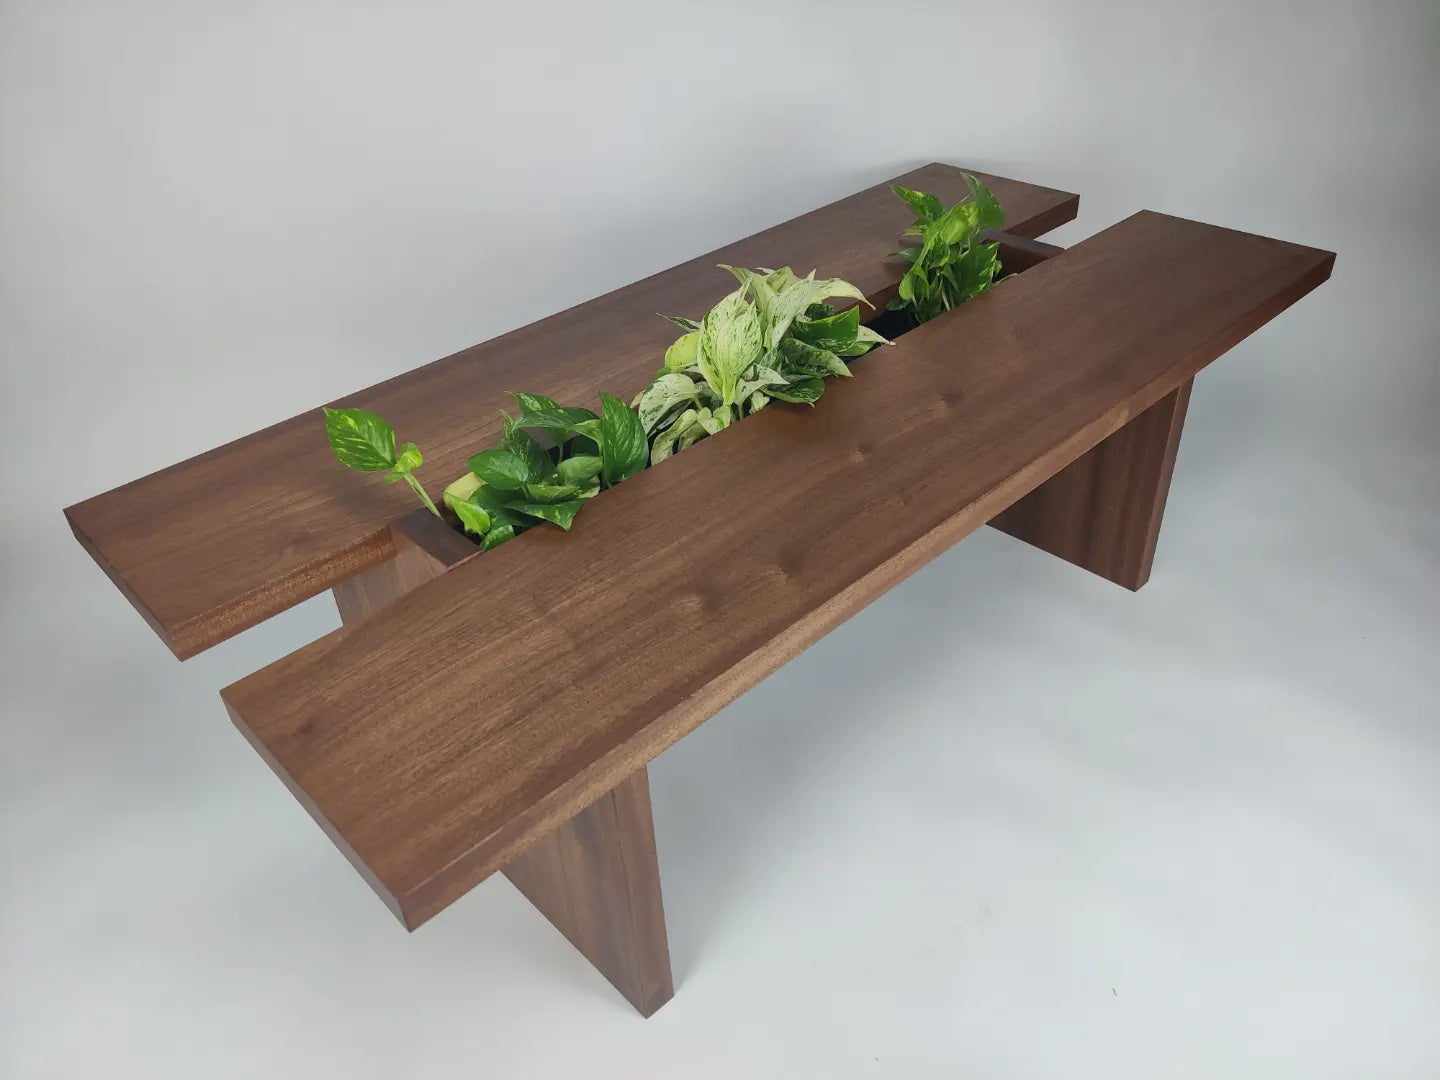 Mahogany Coffee Table with Planter Center